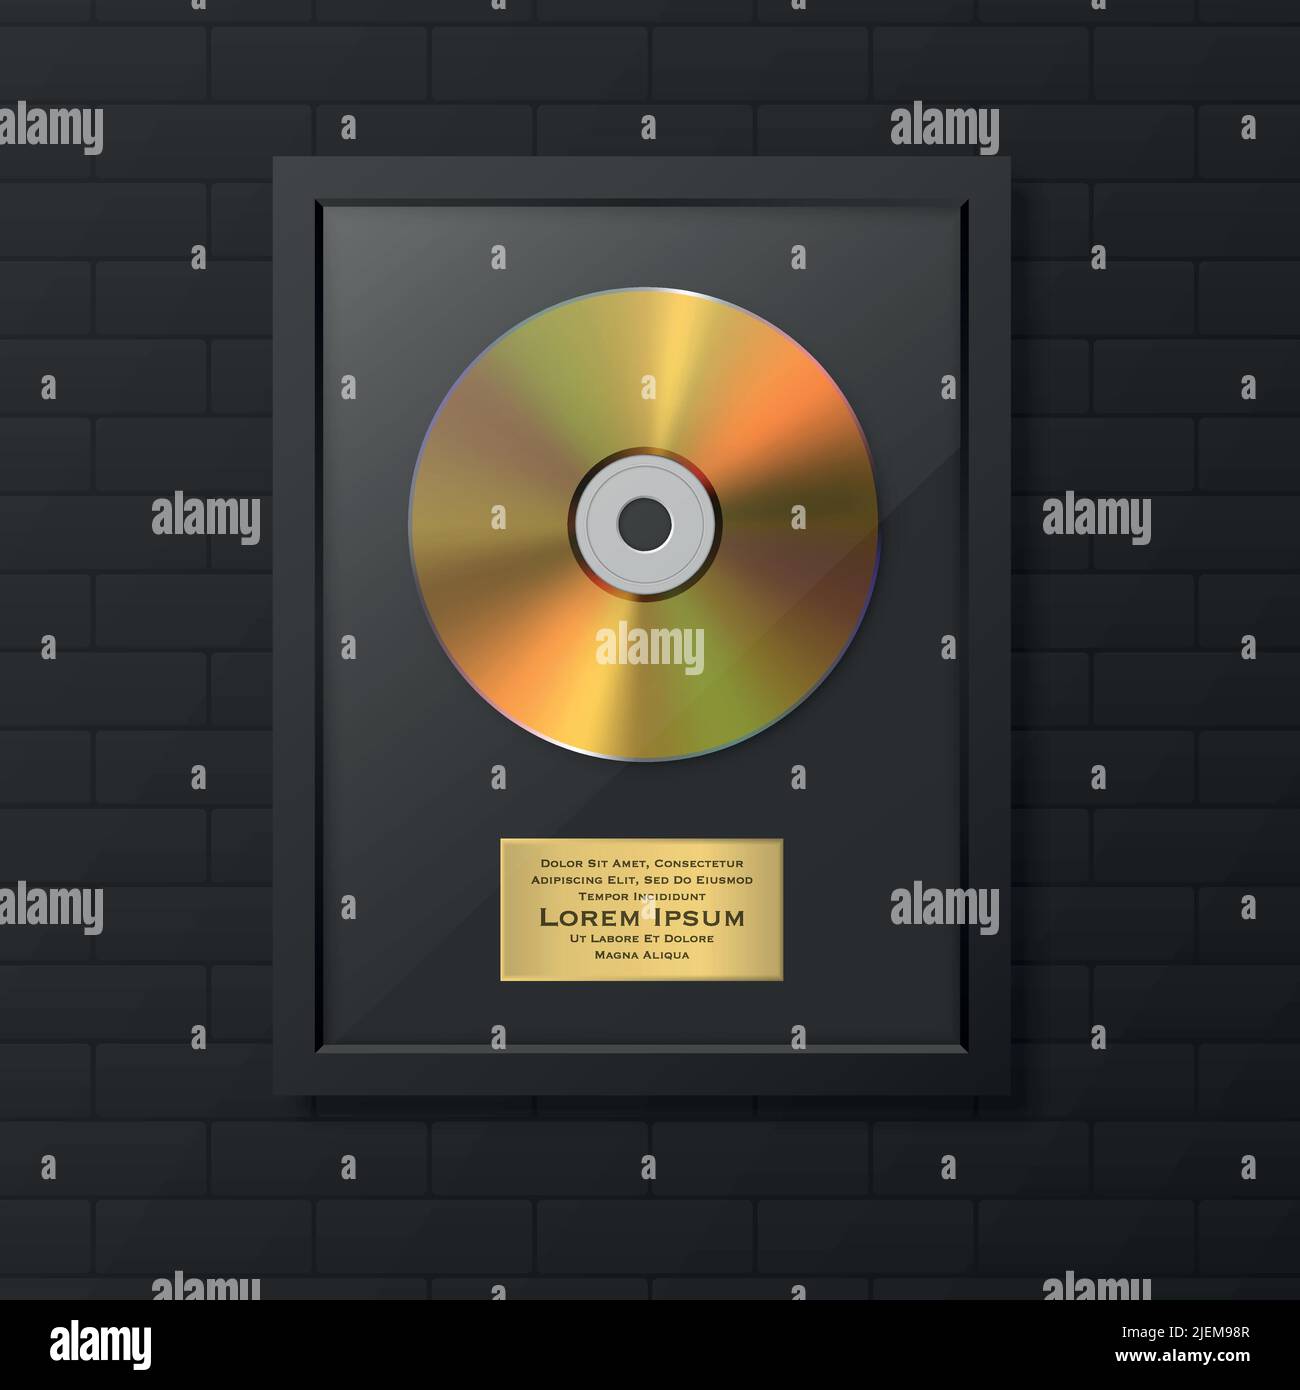 Realistic Vector 3d Golden Yellow CD and Label with Black Frame on Black Brick Wall. Single Album Compact Disc Award, Limited Edition. Design Template Stock Vector